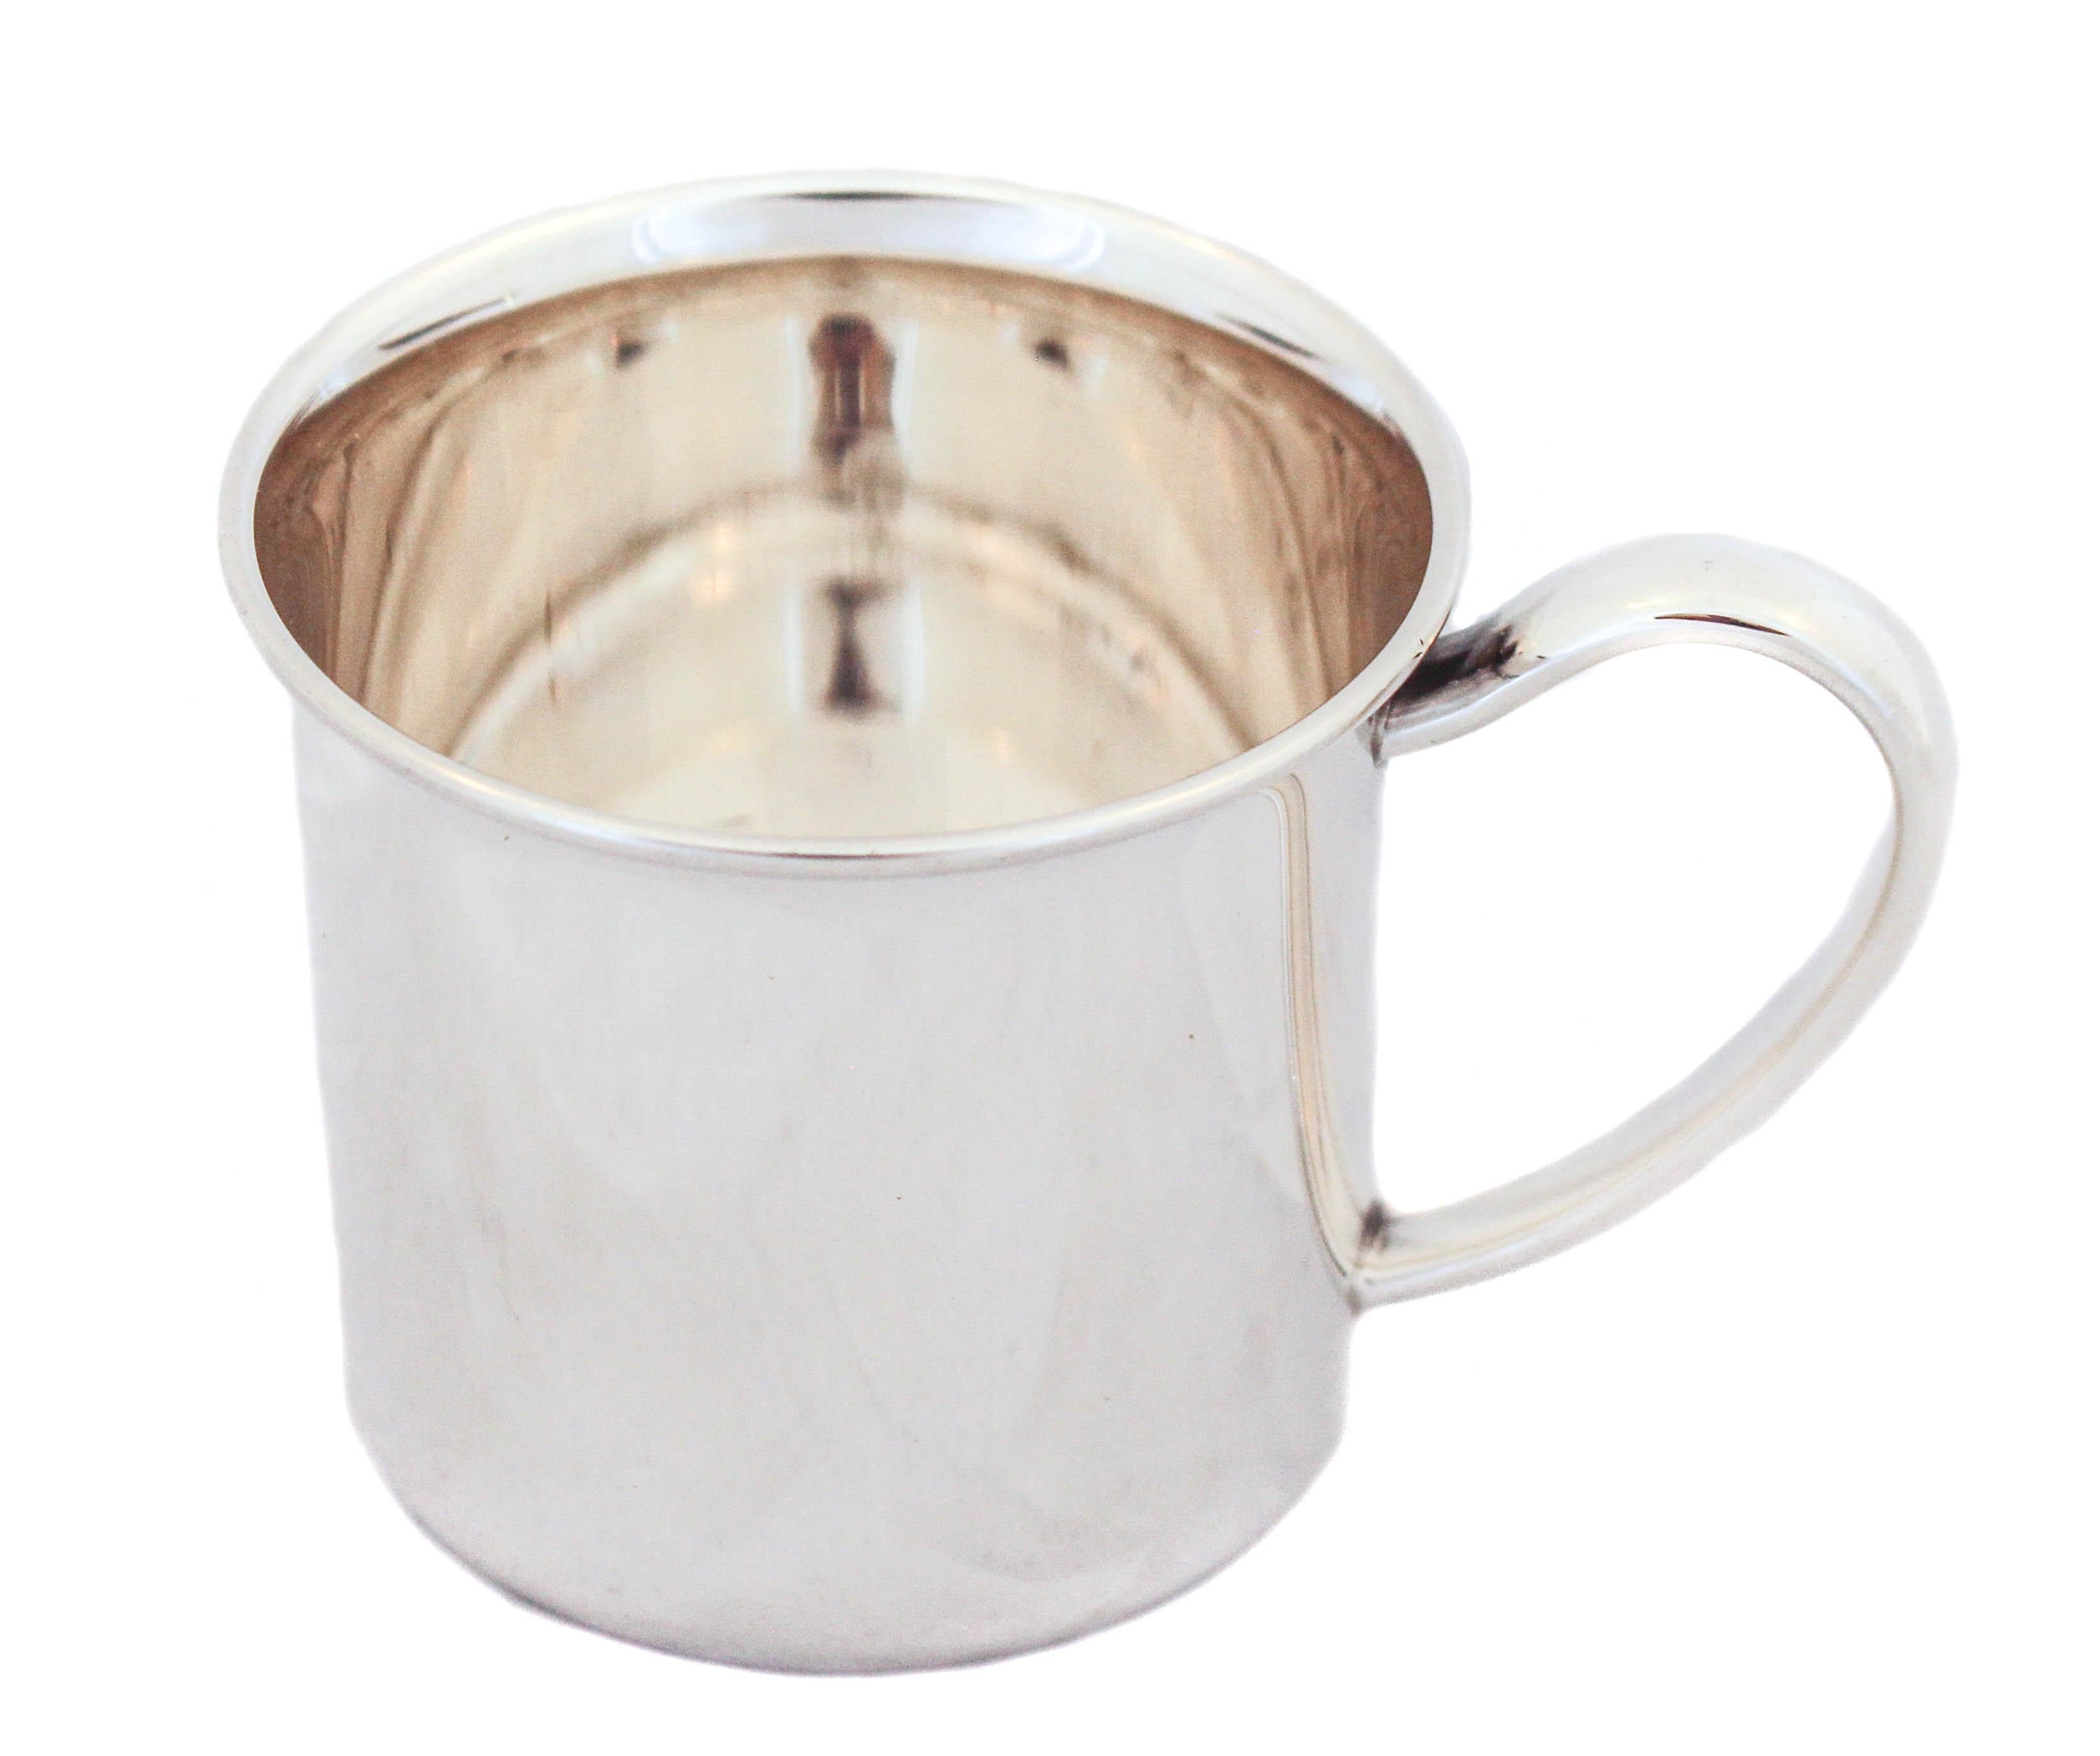 A sterling silver baby cup is a gift that is kept and cherished for a lifetime. A baby’s name, date of birth etc can be monogrammed on the cup to personalize it. Unisex and sleek it makes a beautiful baby gift!